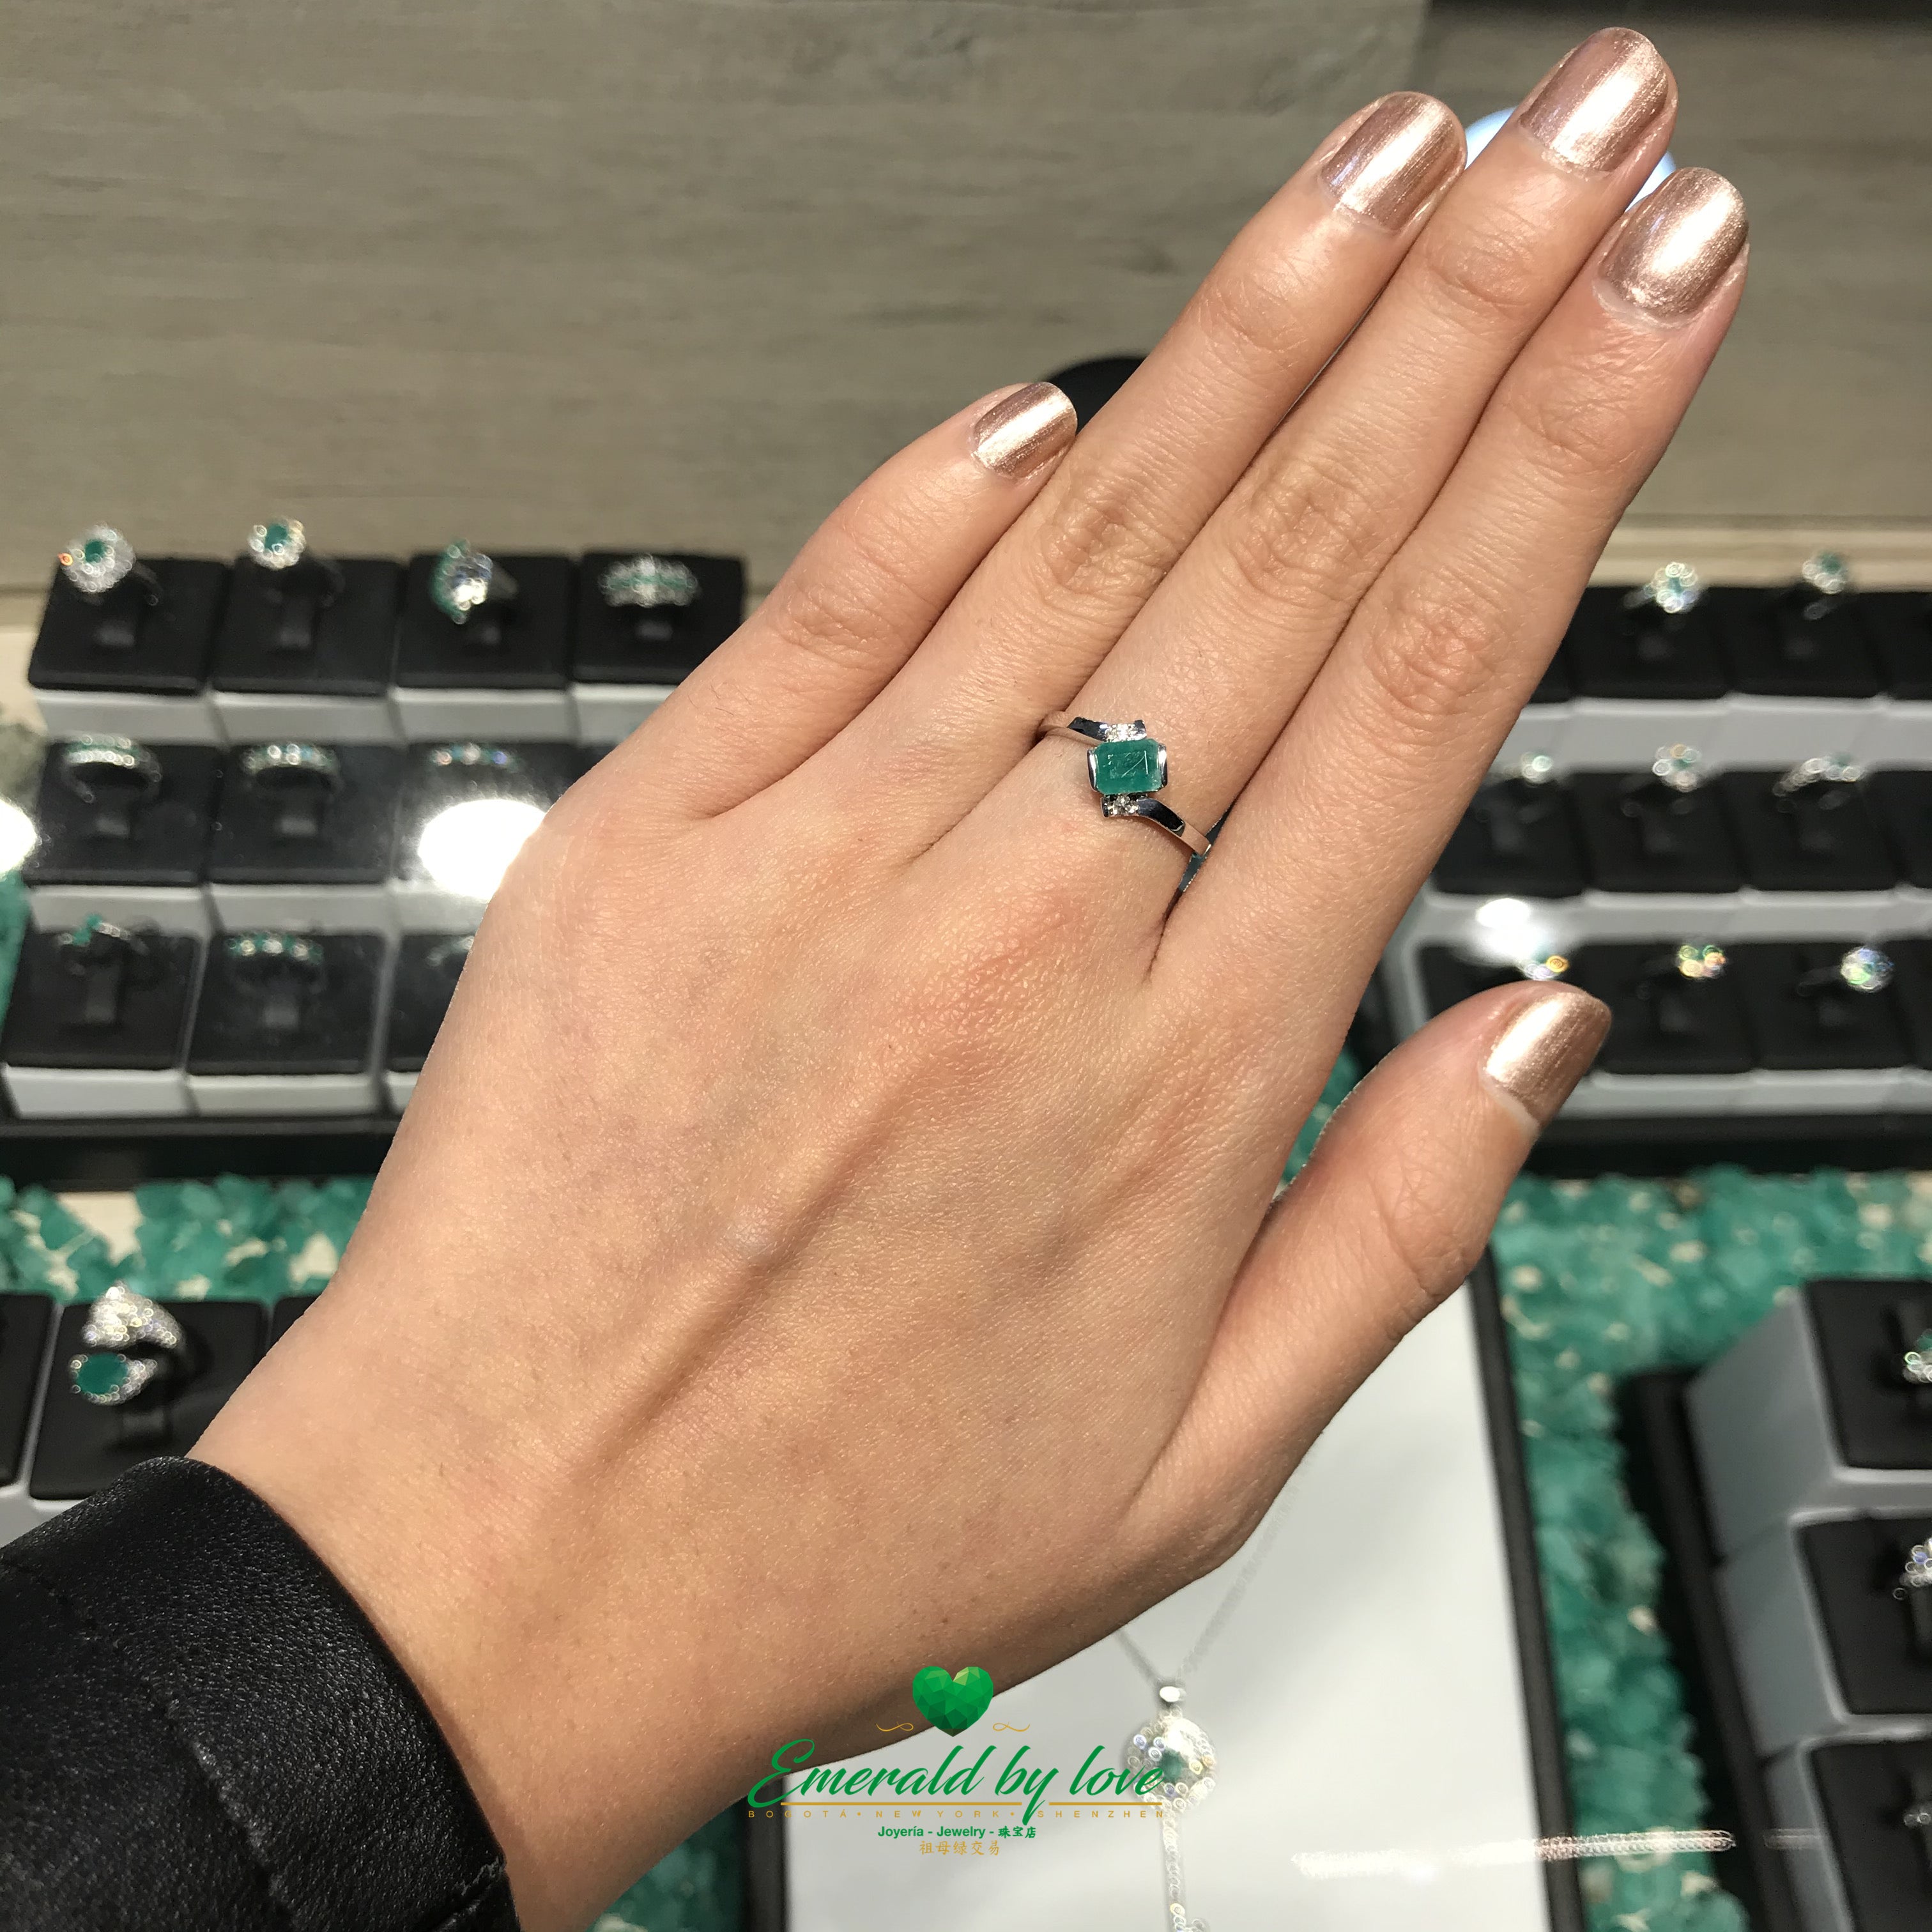 18k White Gold Ring With White Diamonds And Real Colombian Emerald